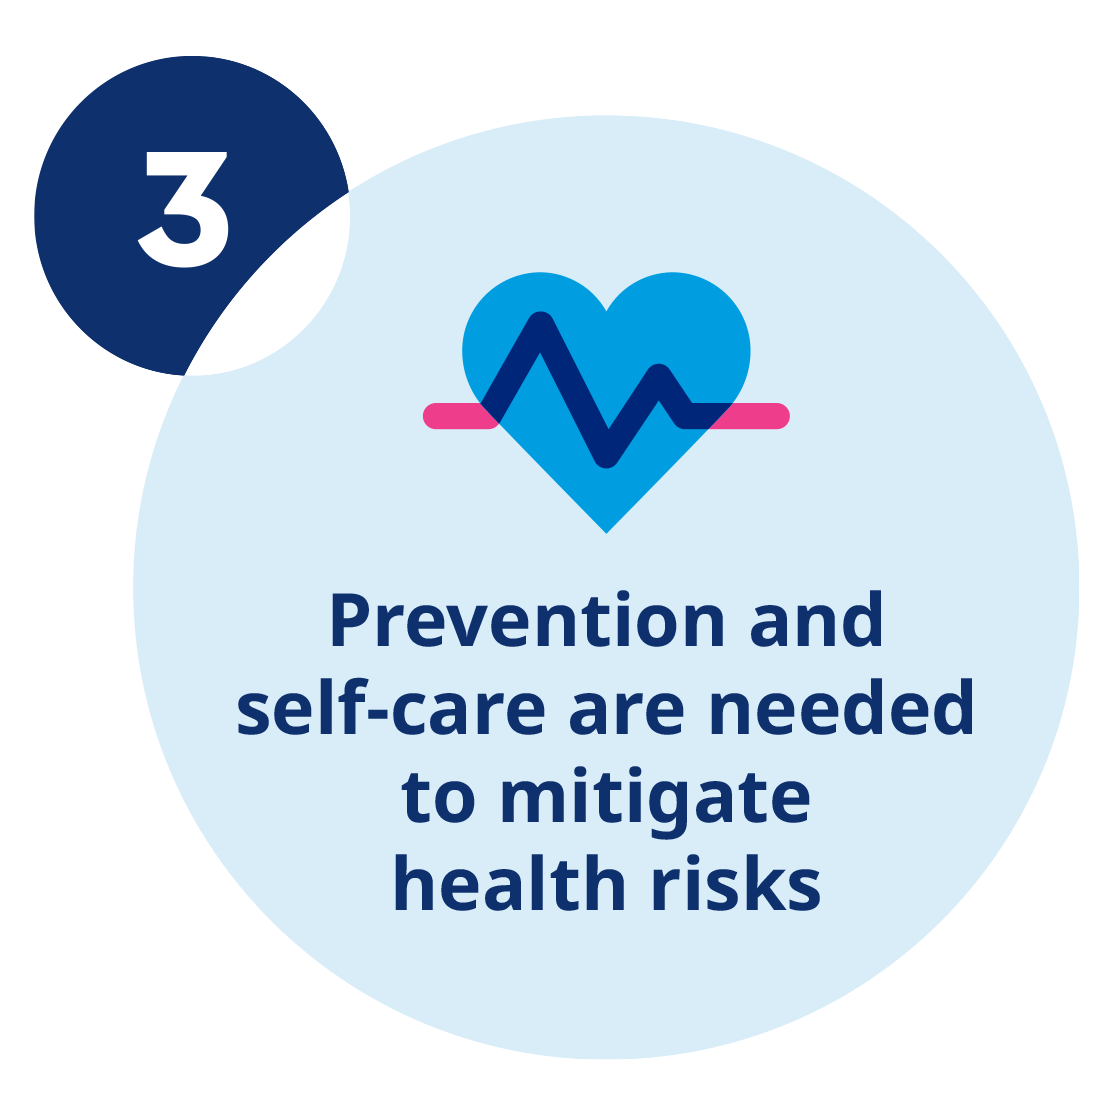 3. Prevention and self-care are needed to mitigate health risks